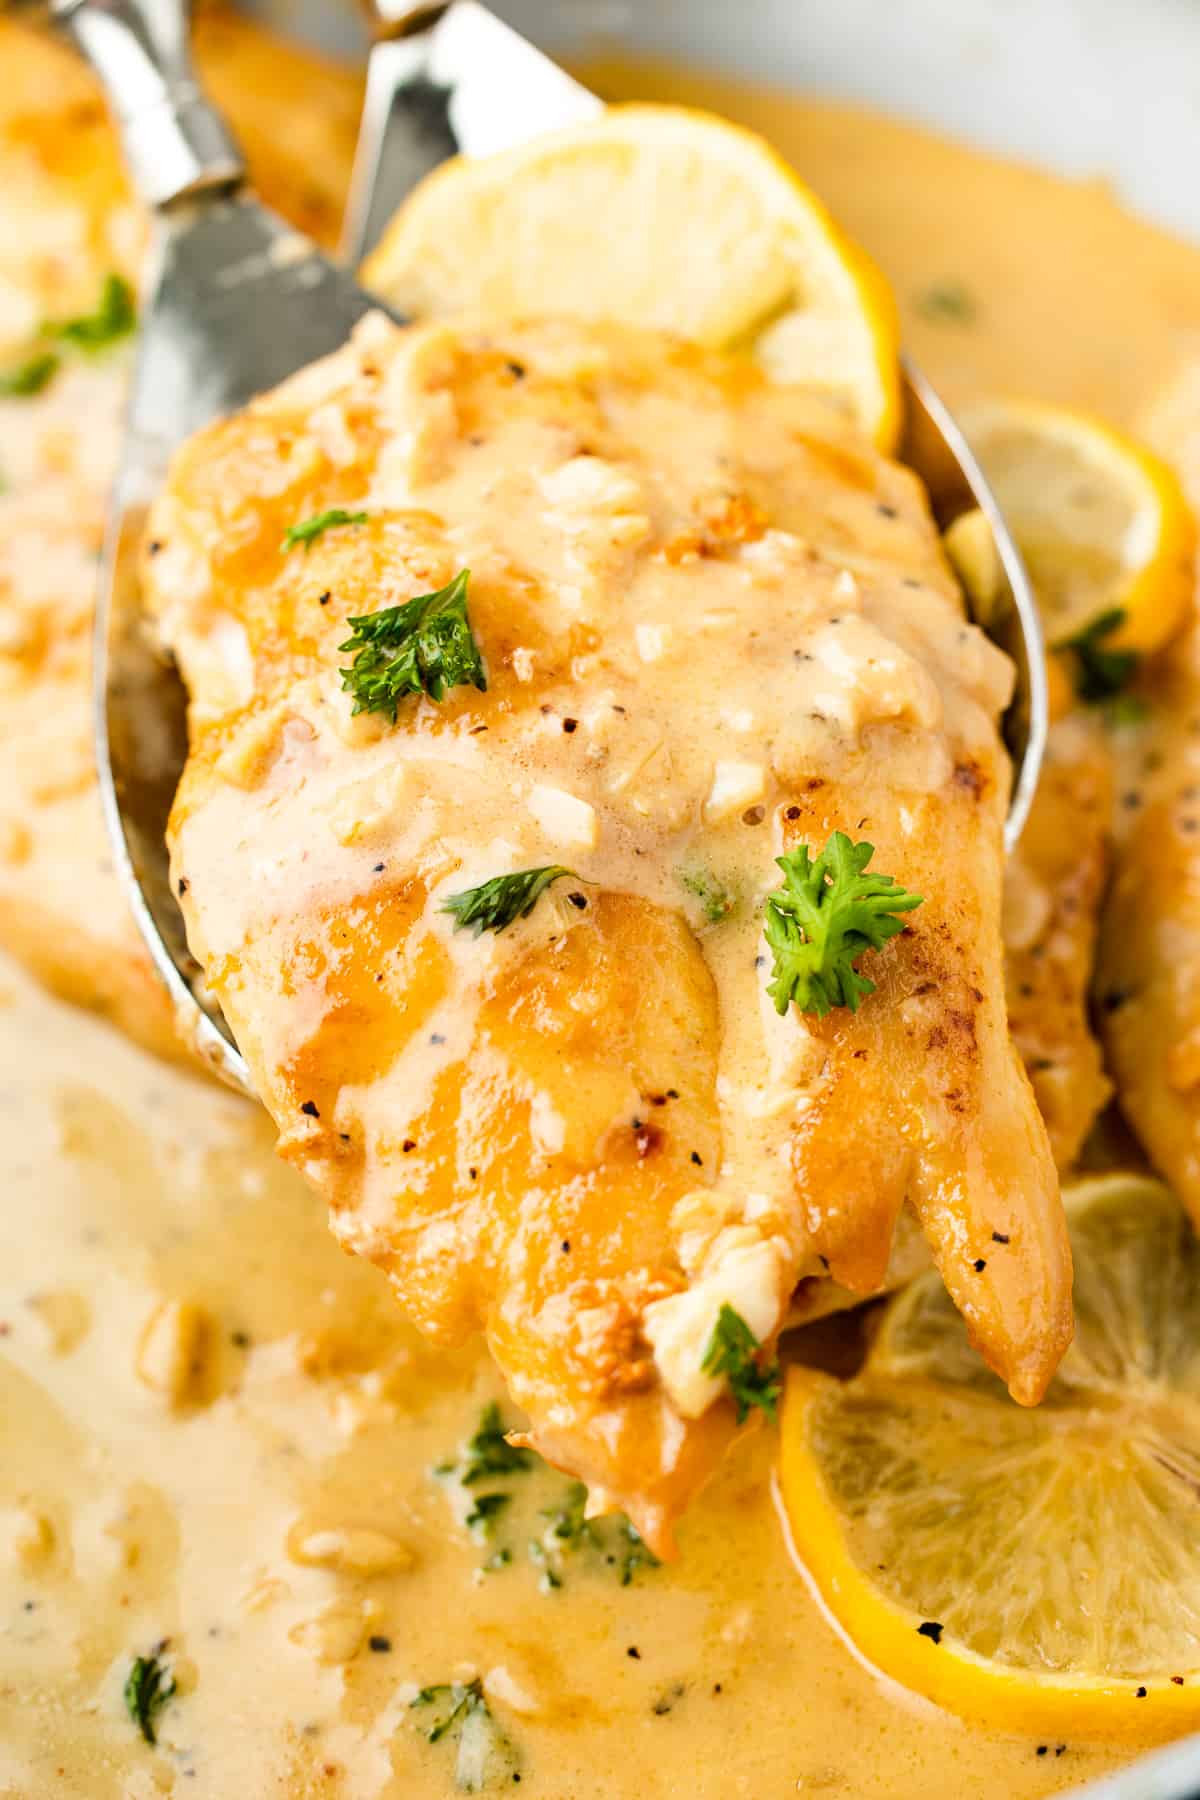 Chicken breast in lemon sauce on a serving spoon, garnished with lemon and parsley.